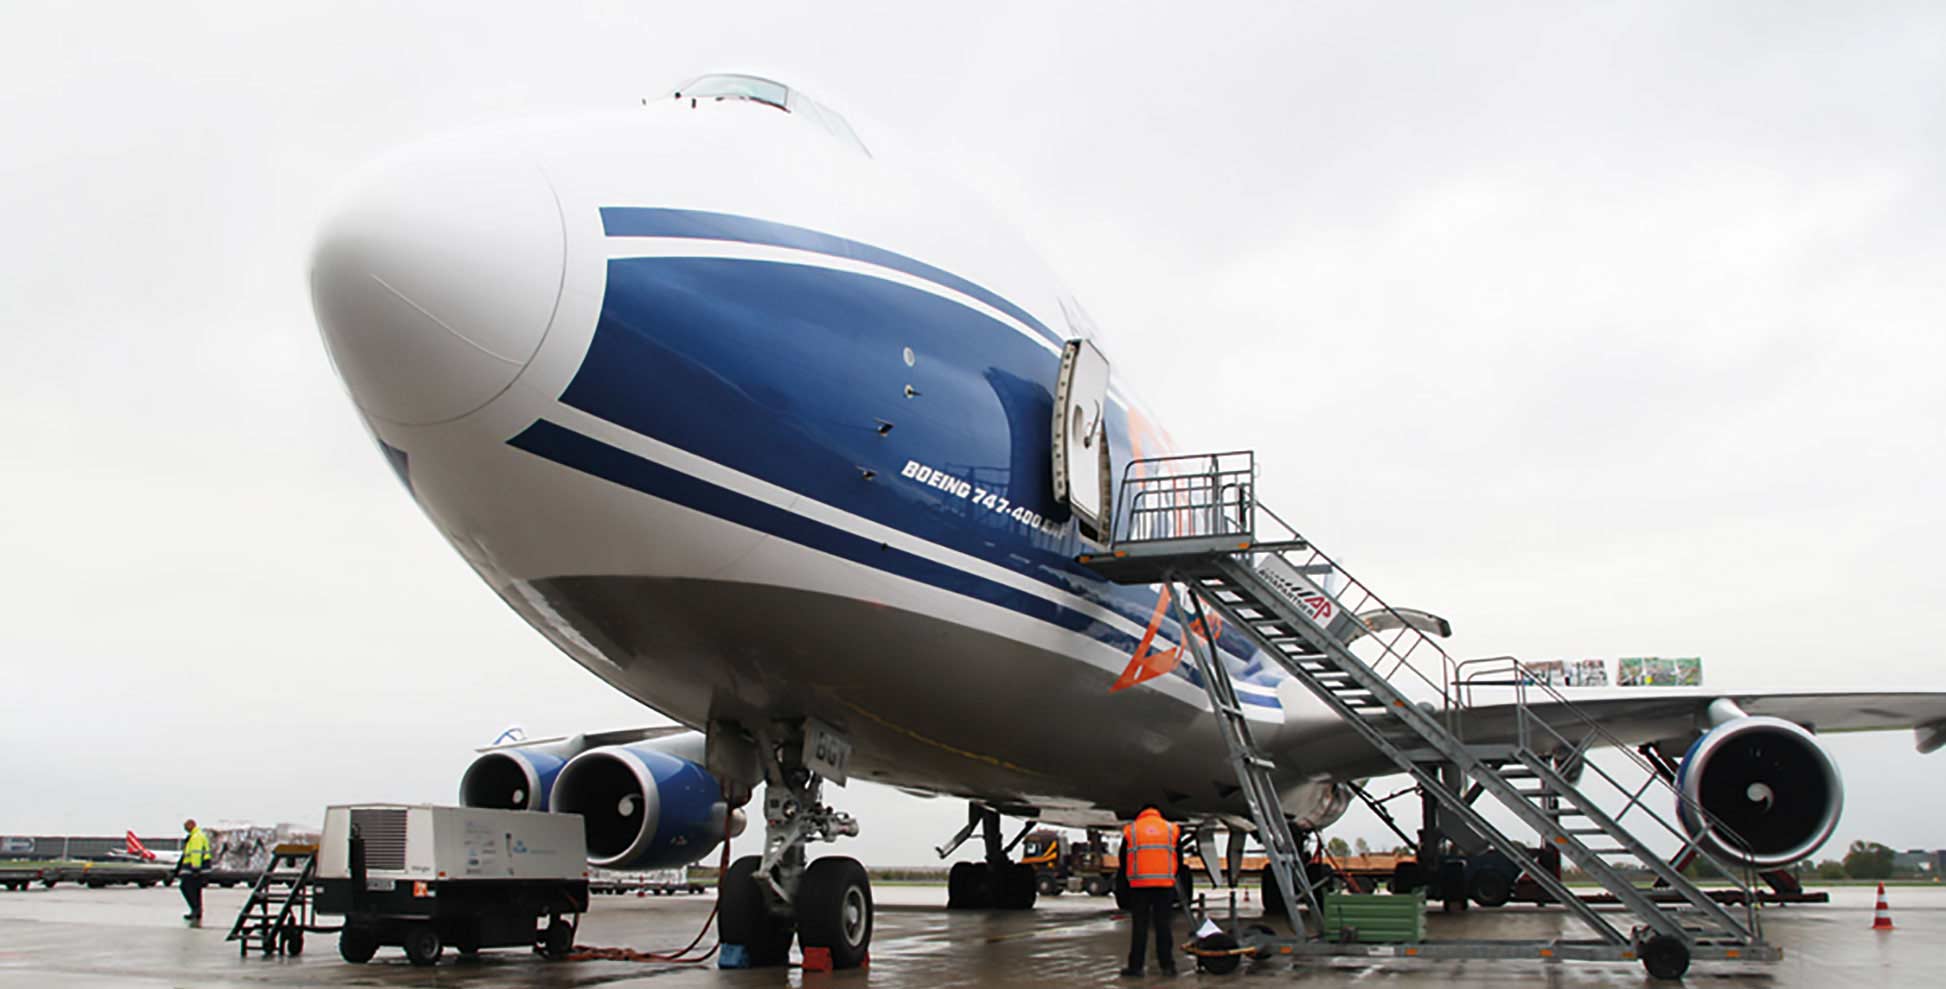 Picture of aircraft during loading